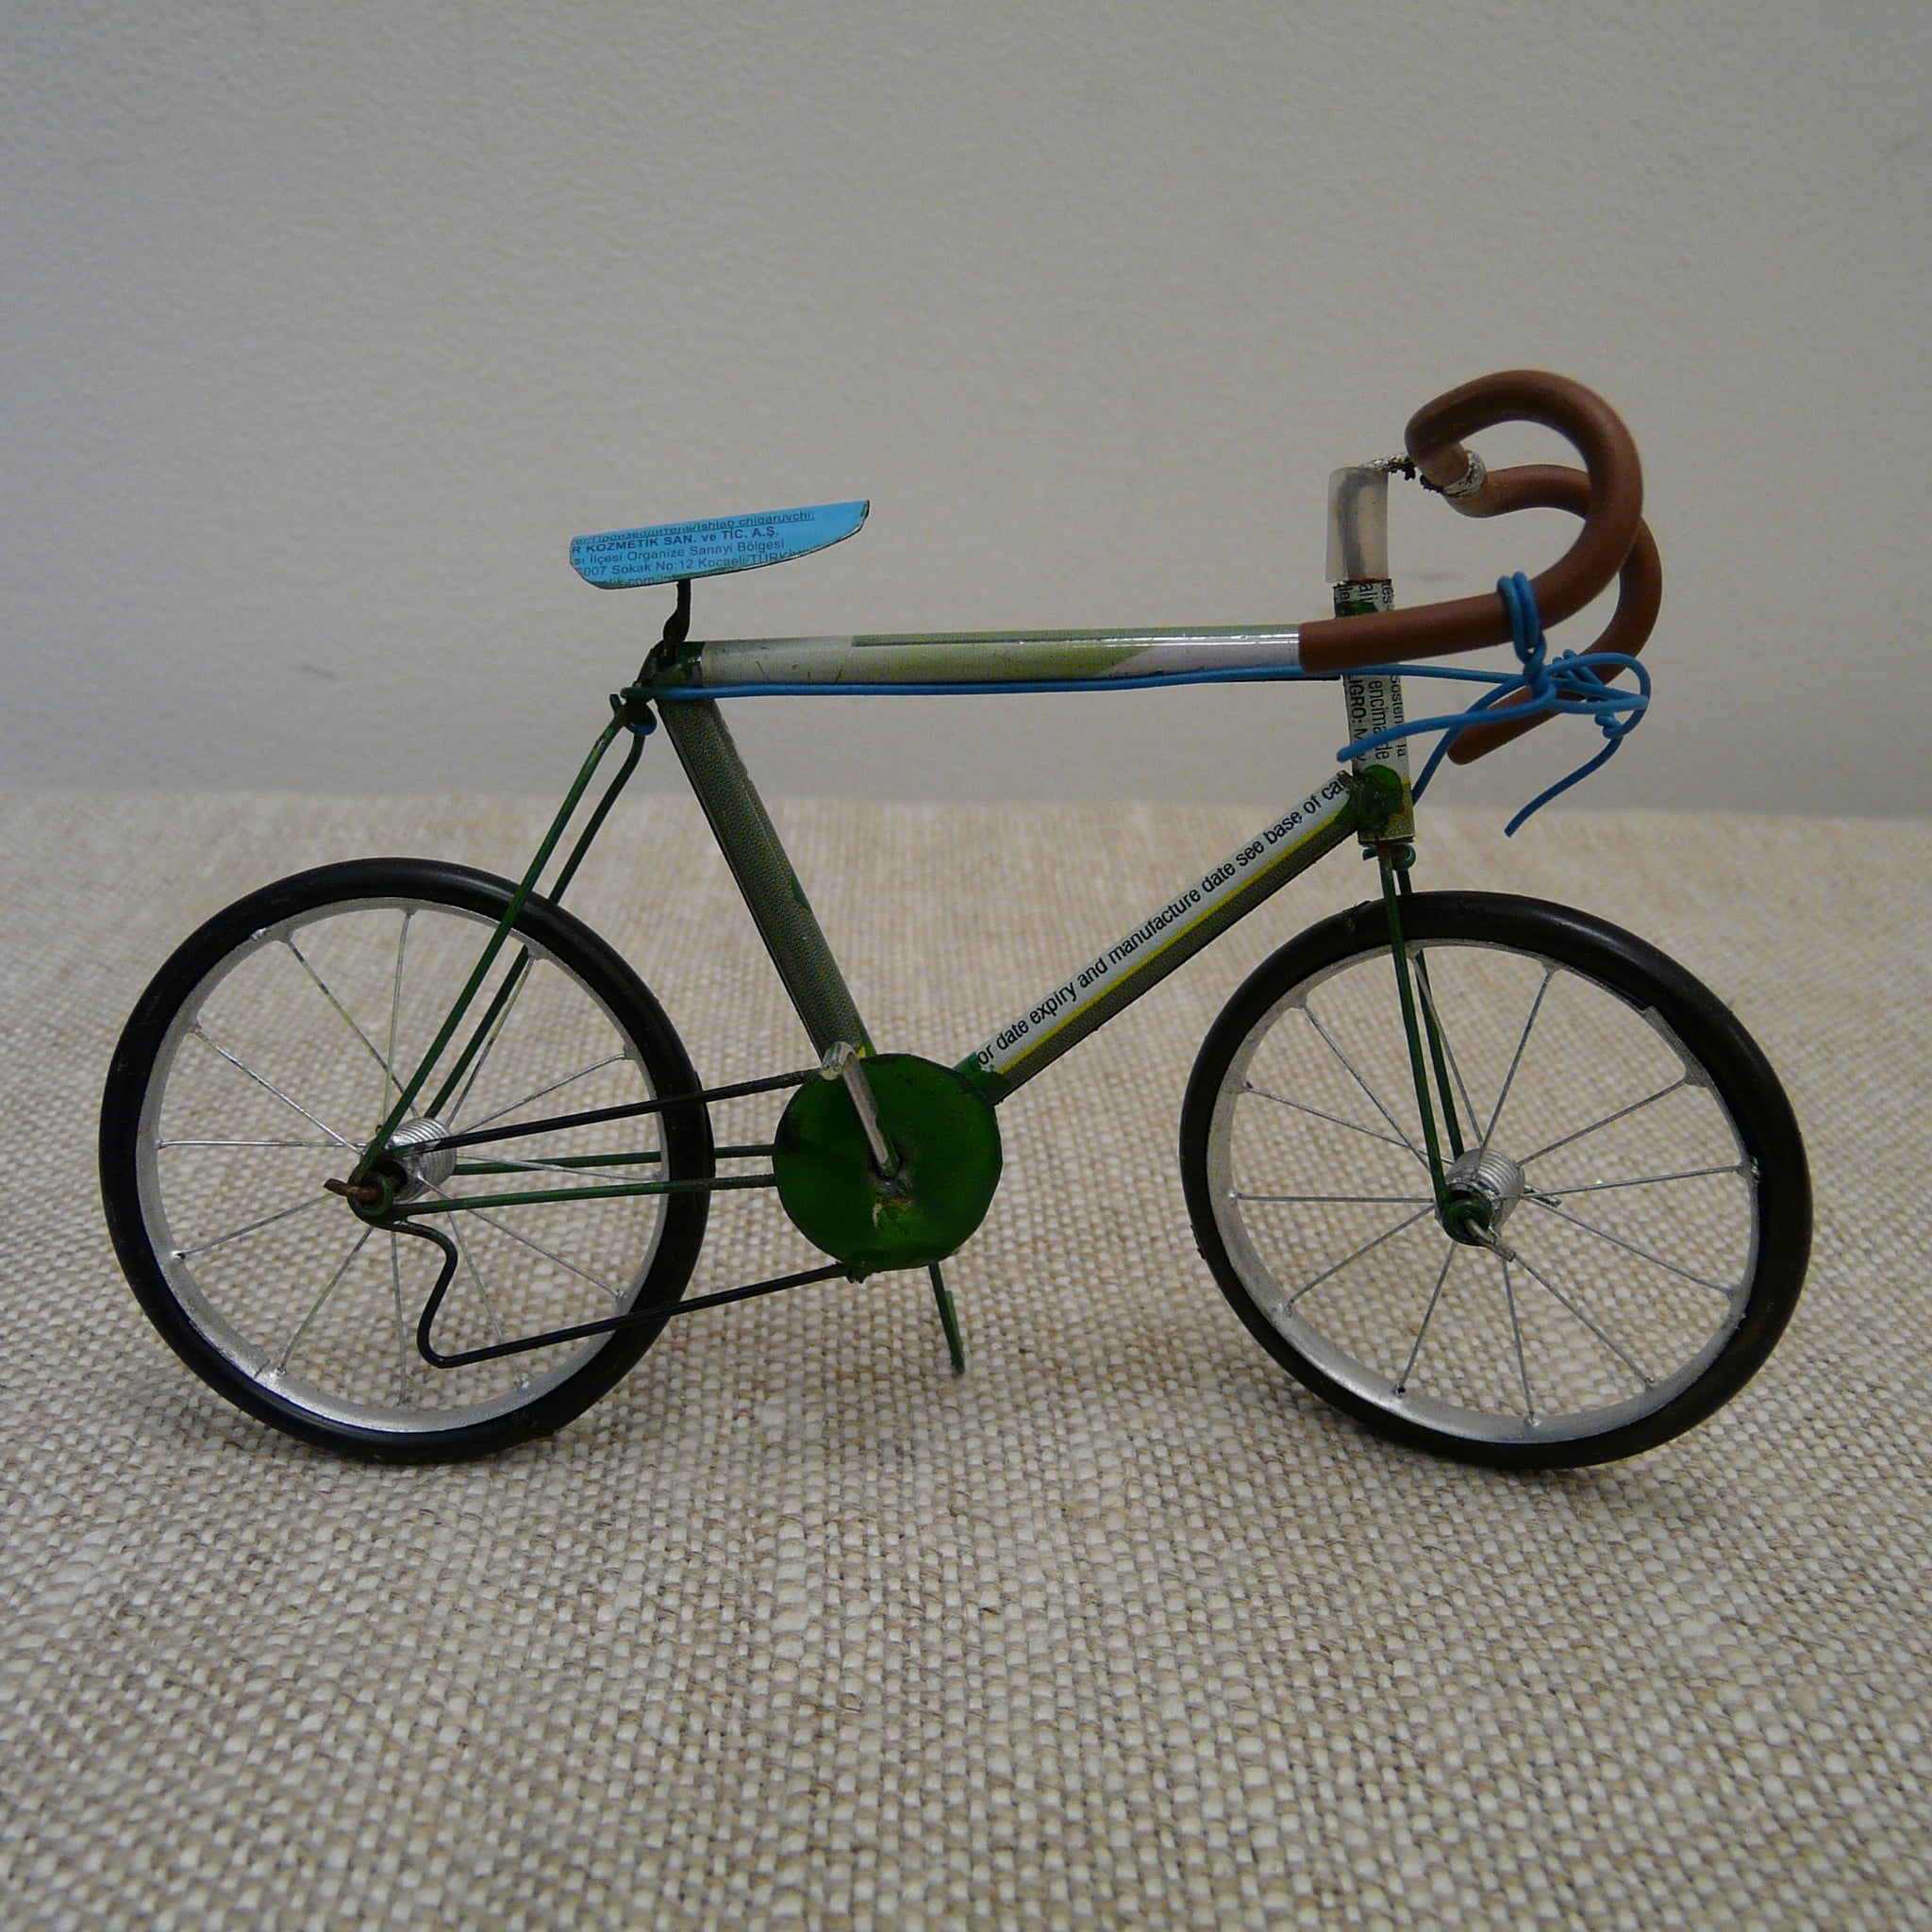 Model Racing Bicycle made from Upcycled Cans